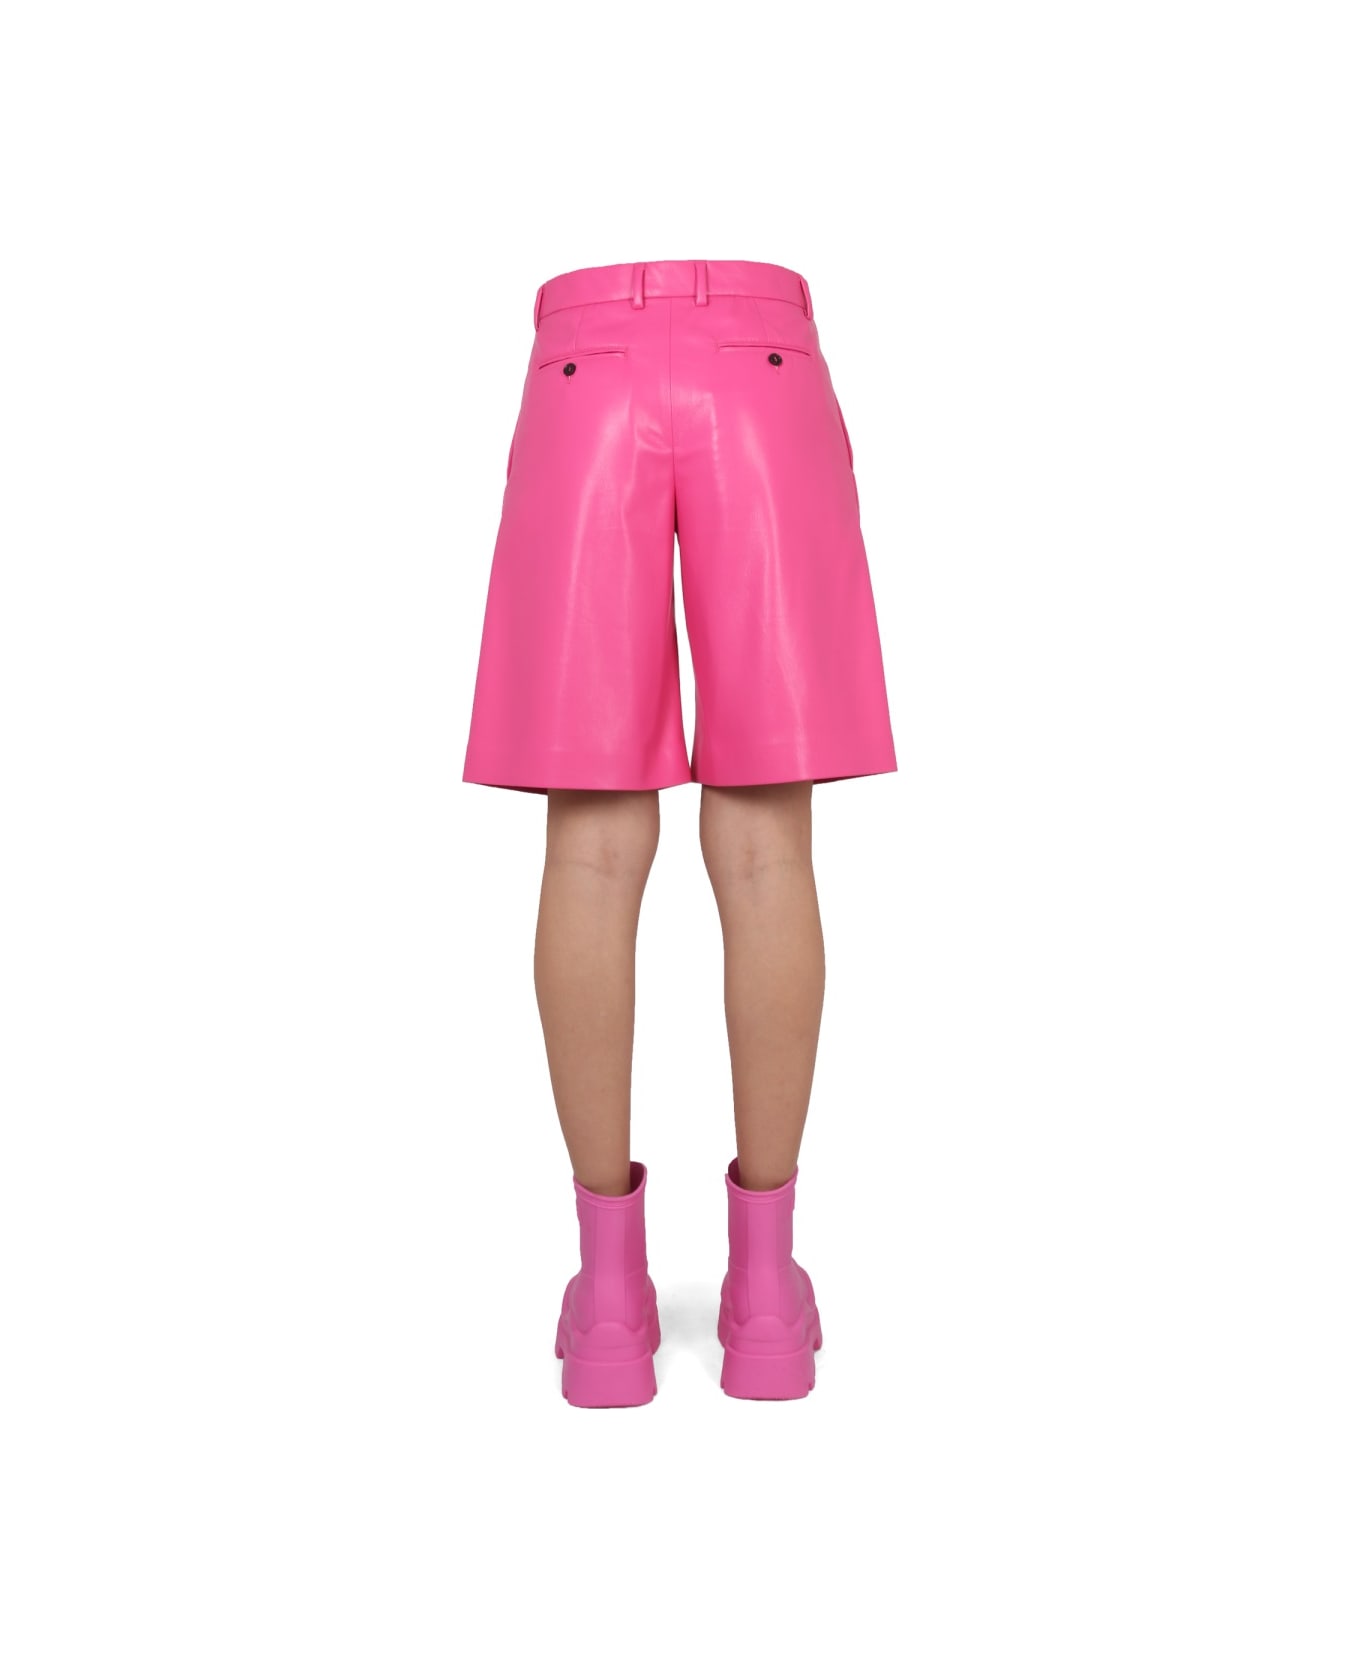 MSGM Faux Leather Bermuda Shorts - PINK